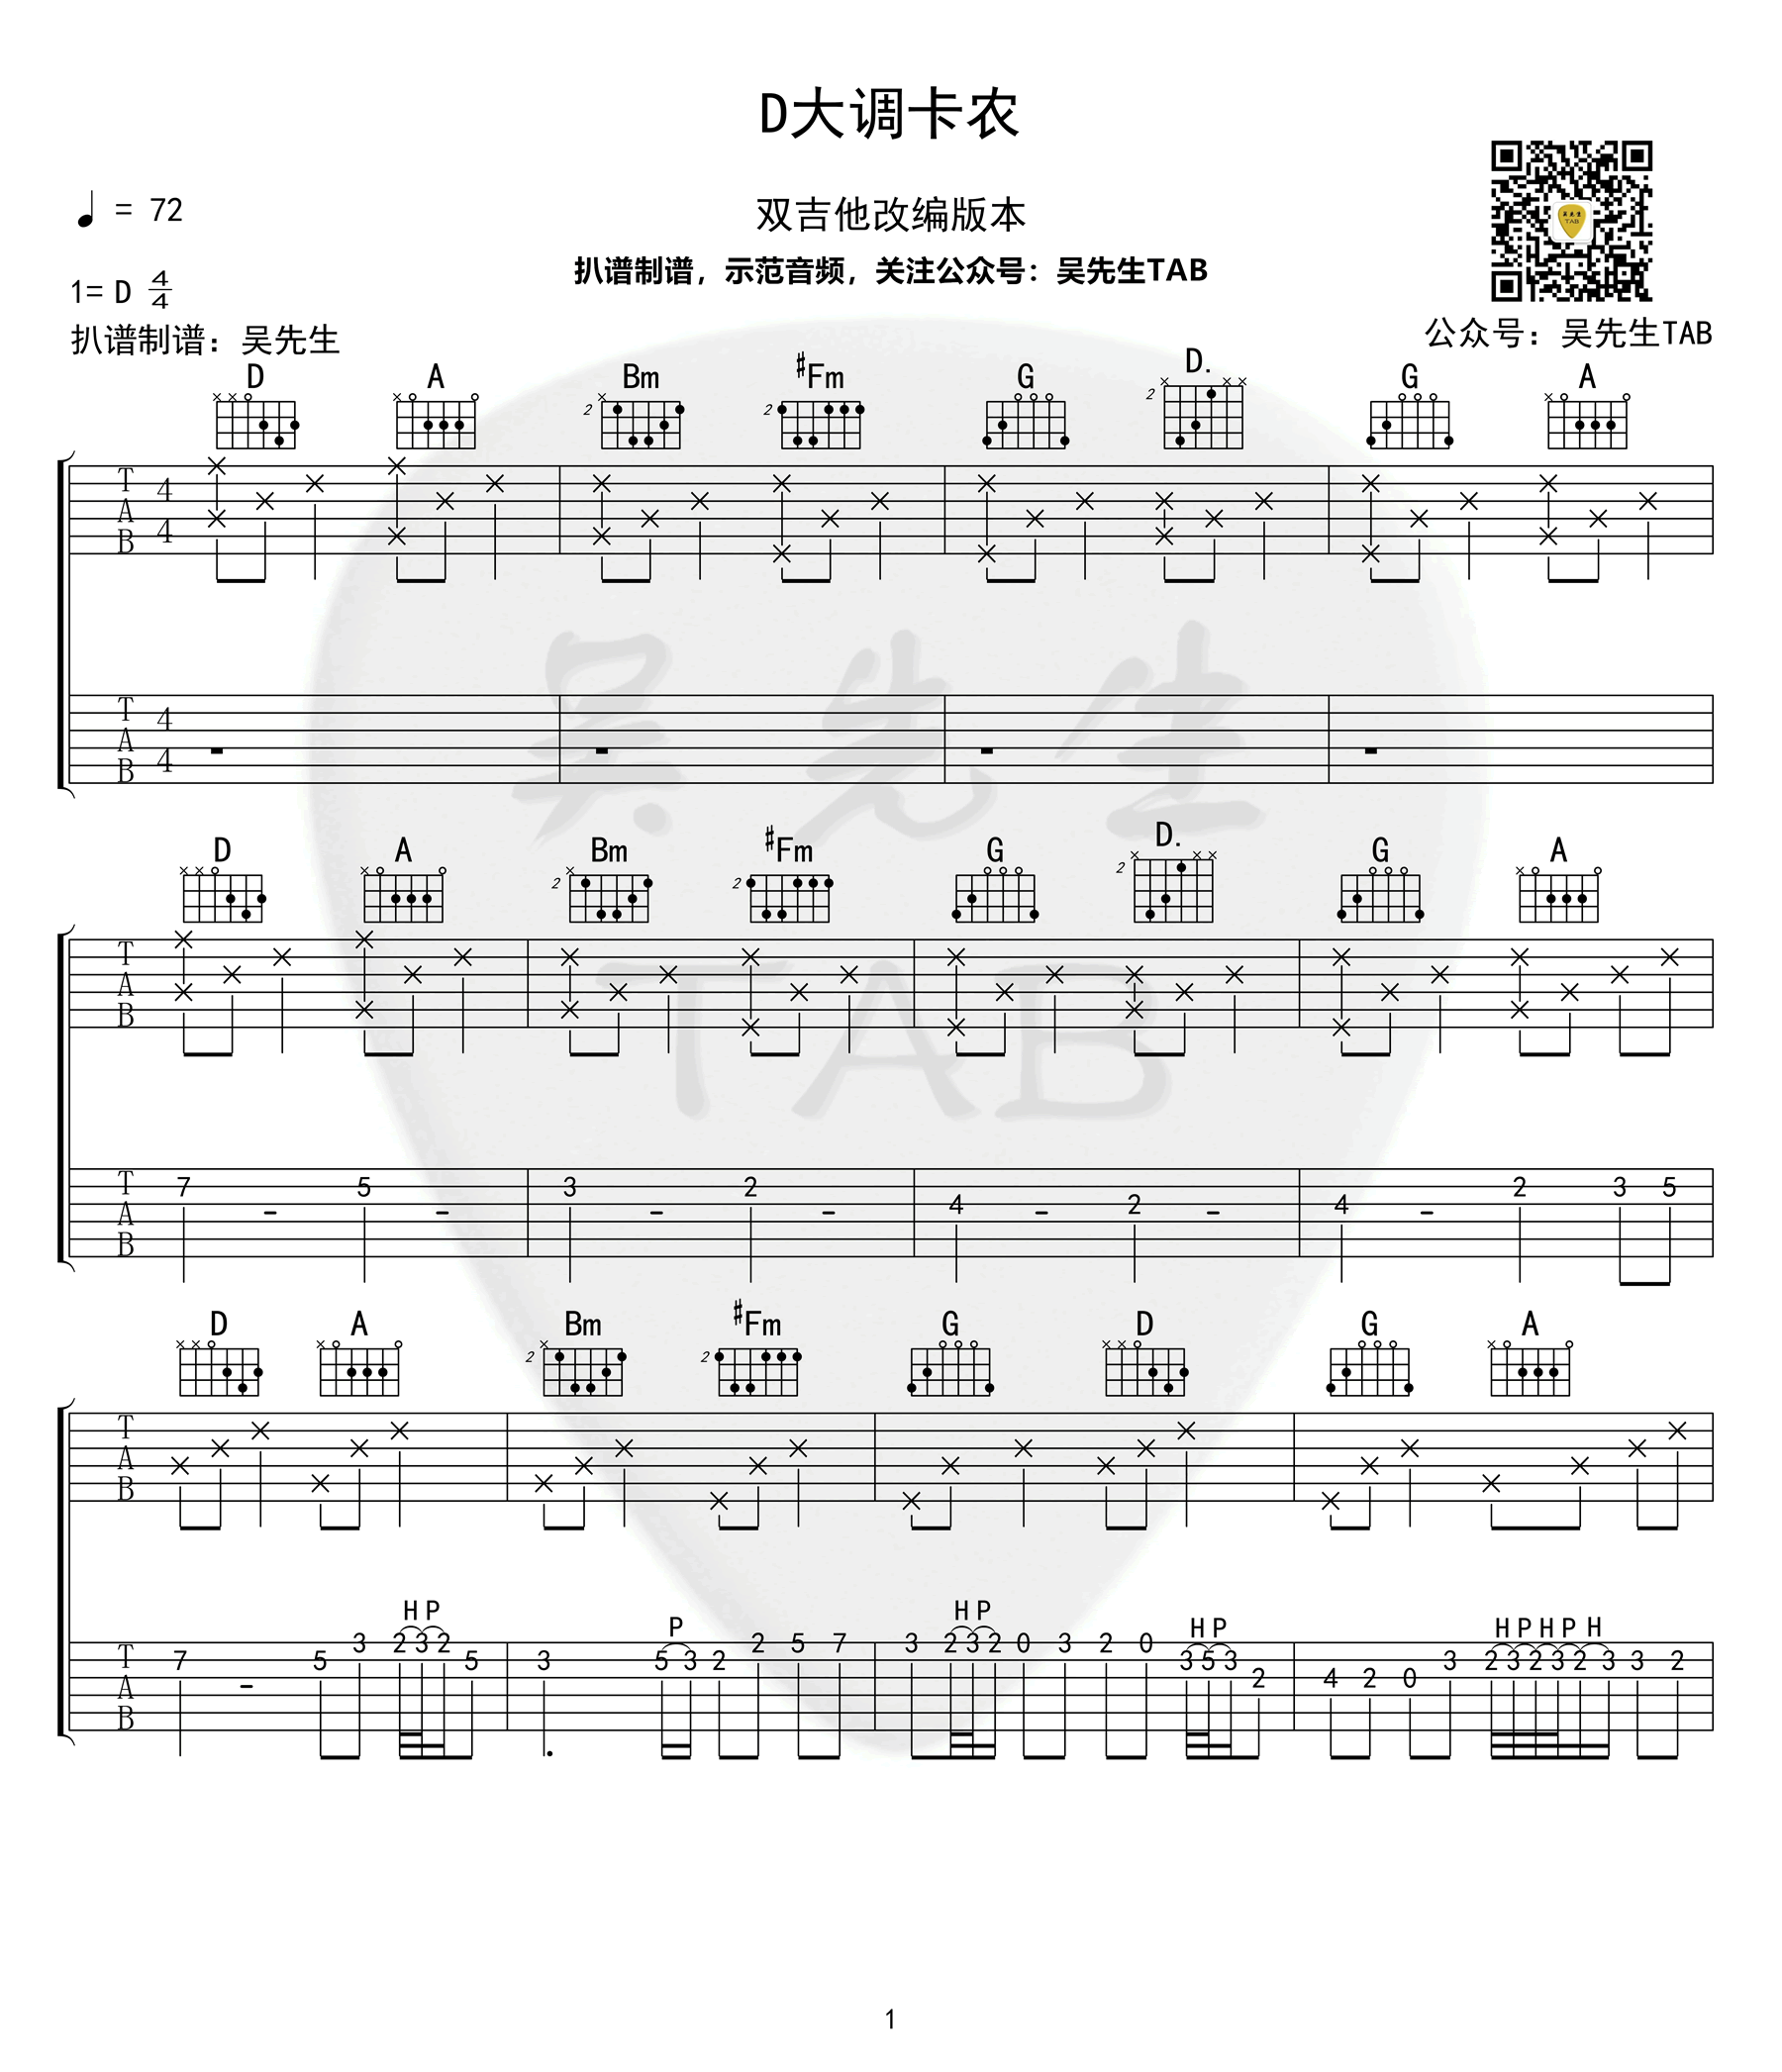 D大调卡农吉他谱_双吉他版本_Canon_and_Gigue_in_D